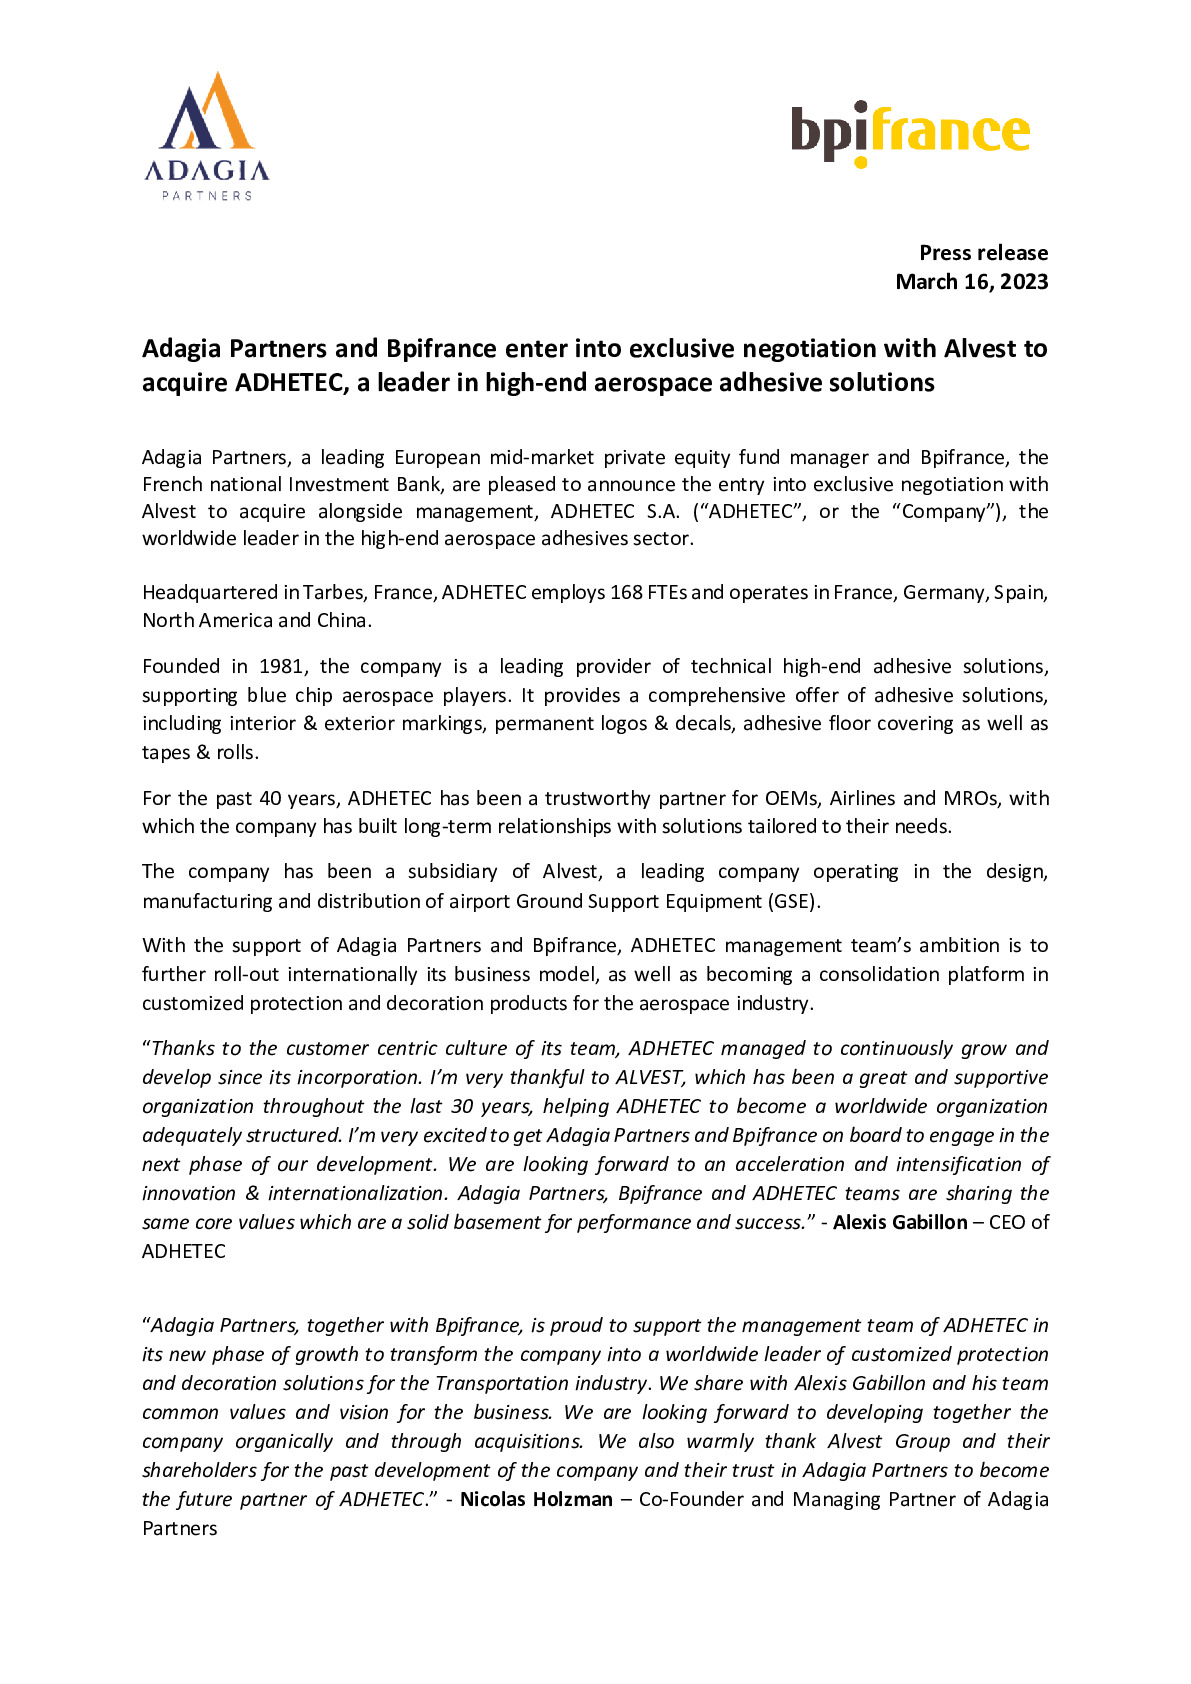 2023 03 06 – PR – Adagia Partners and Bpifrance enter into exclusive negotiation with Alvest to acquire ADHETEC, a leader in high-end aerospace adhesive solutions-pdf